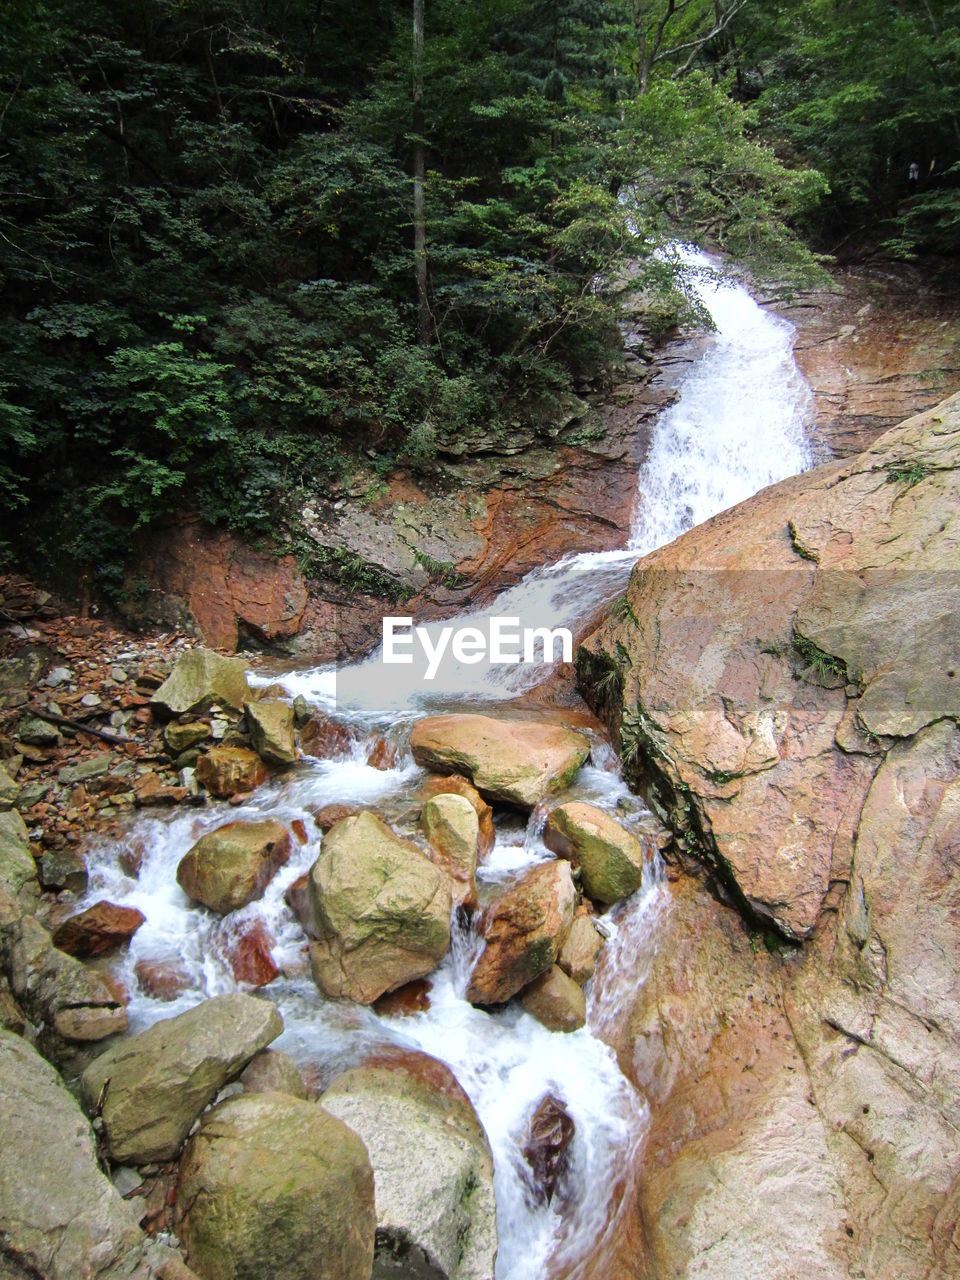 STREAM AMIDST ROCKS IN FOREST